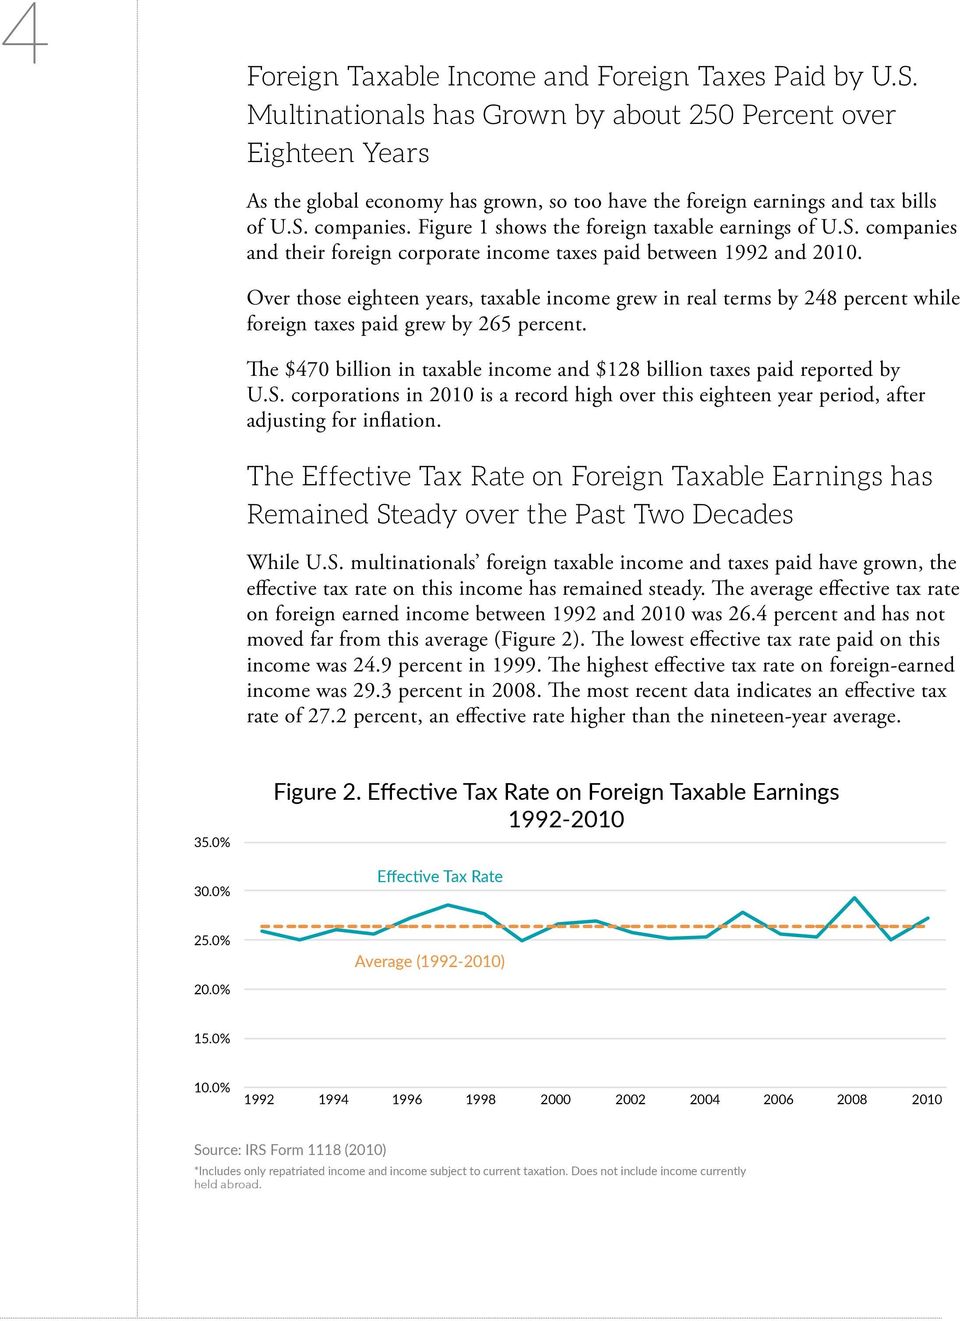 Figure 1 shows the foreign taxable earnings of U.S. companies and their foreign corporate income taxes paid between 1992 and 2010.